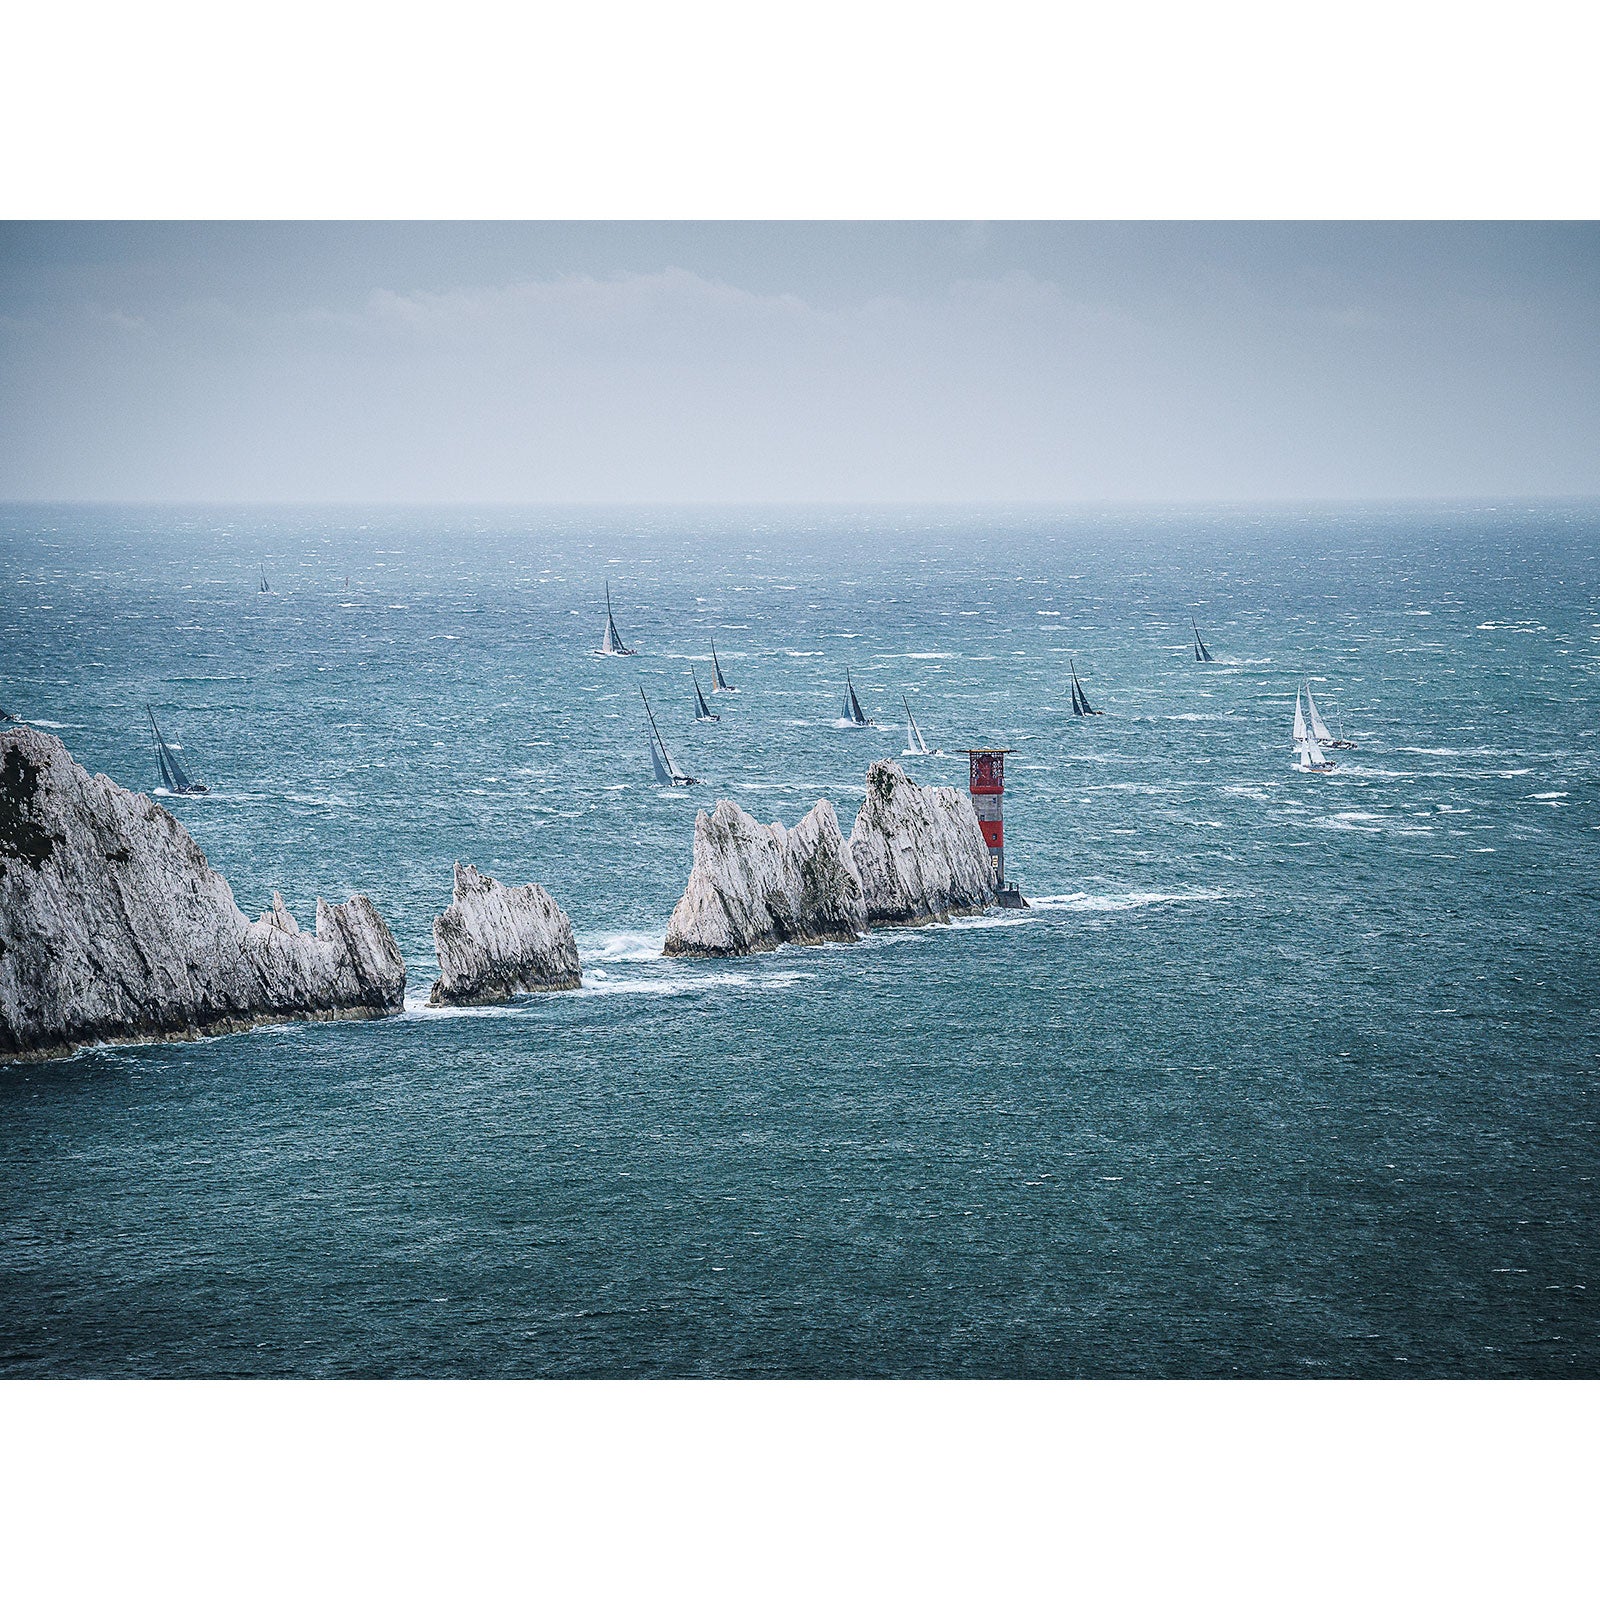 Sailing boats navigating past the chalk cliffs of the Isle of Wight on a breezy day during the Fastnet Race at The Needles captured by Available Light Photography.